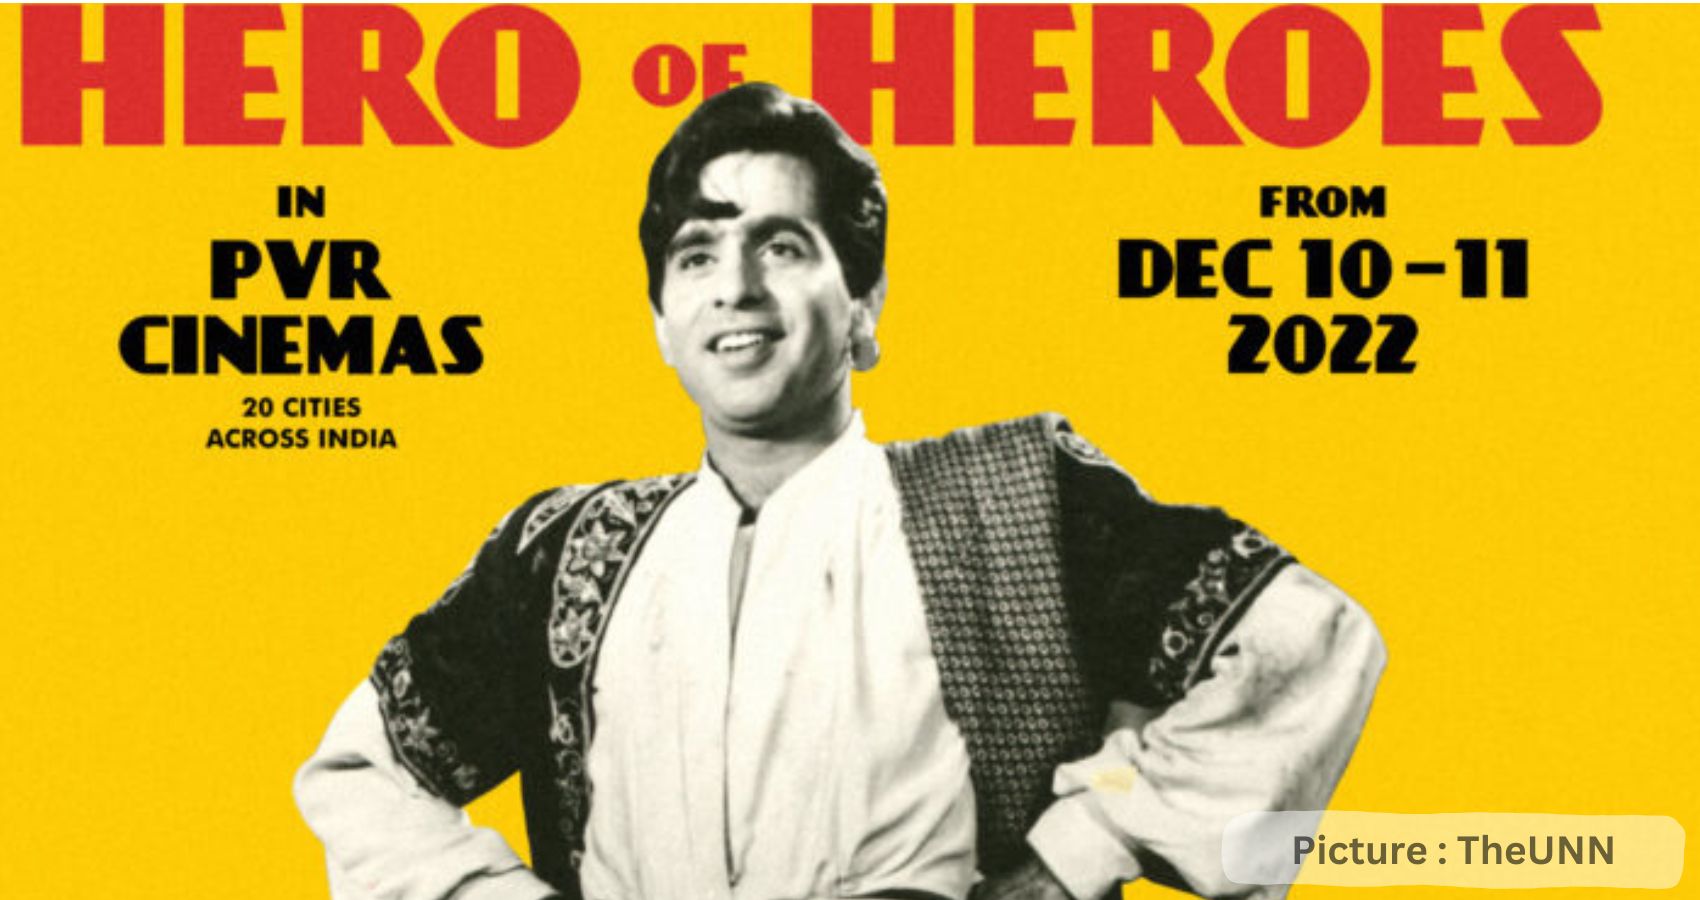 Dilip Kumar Film Festival To Commemorate His 100th Birthday Planned